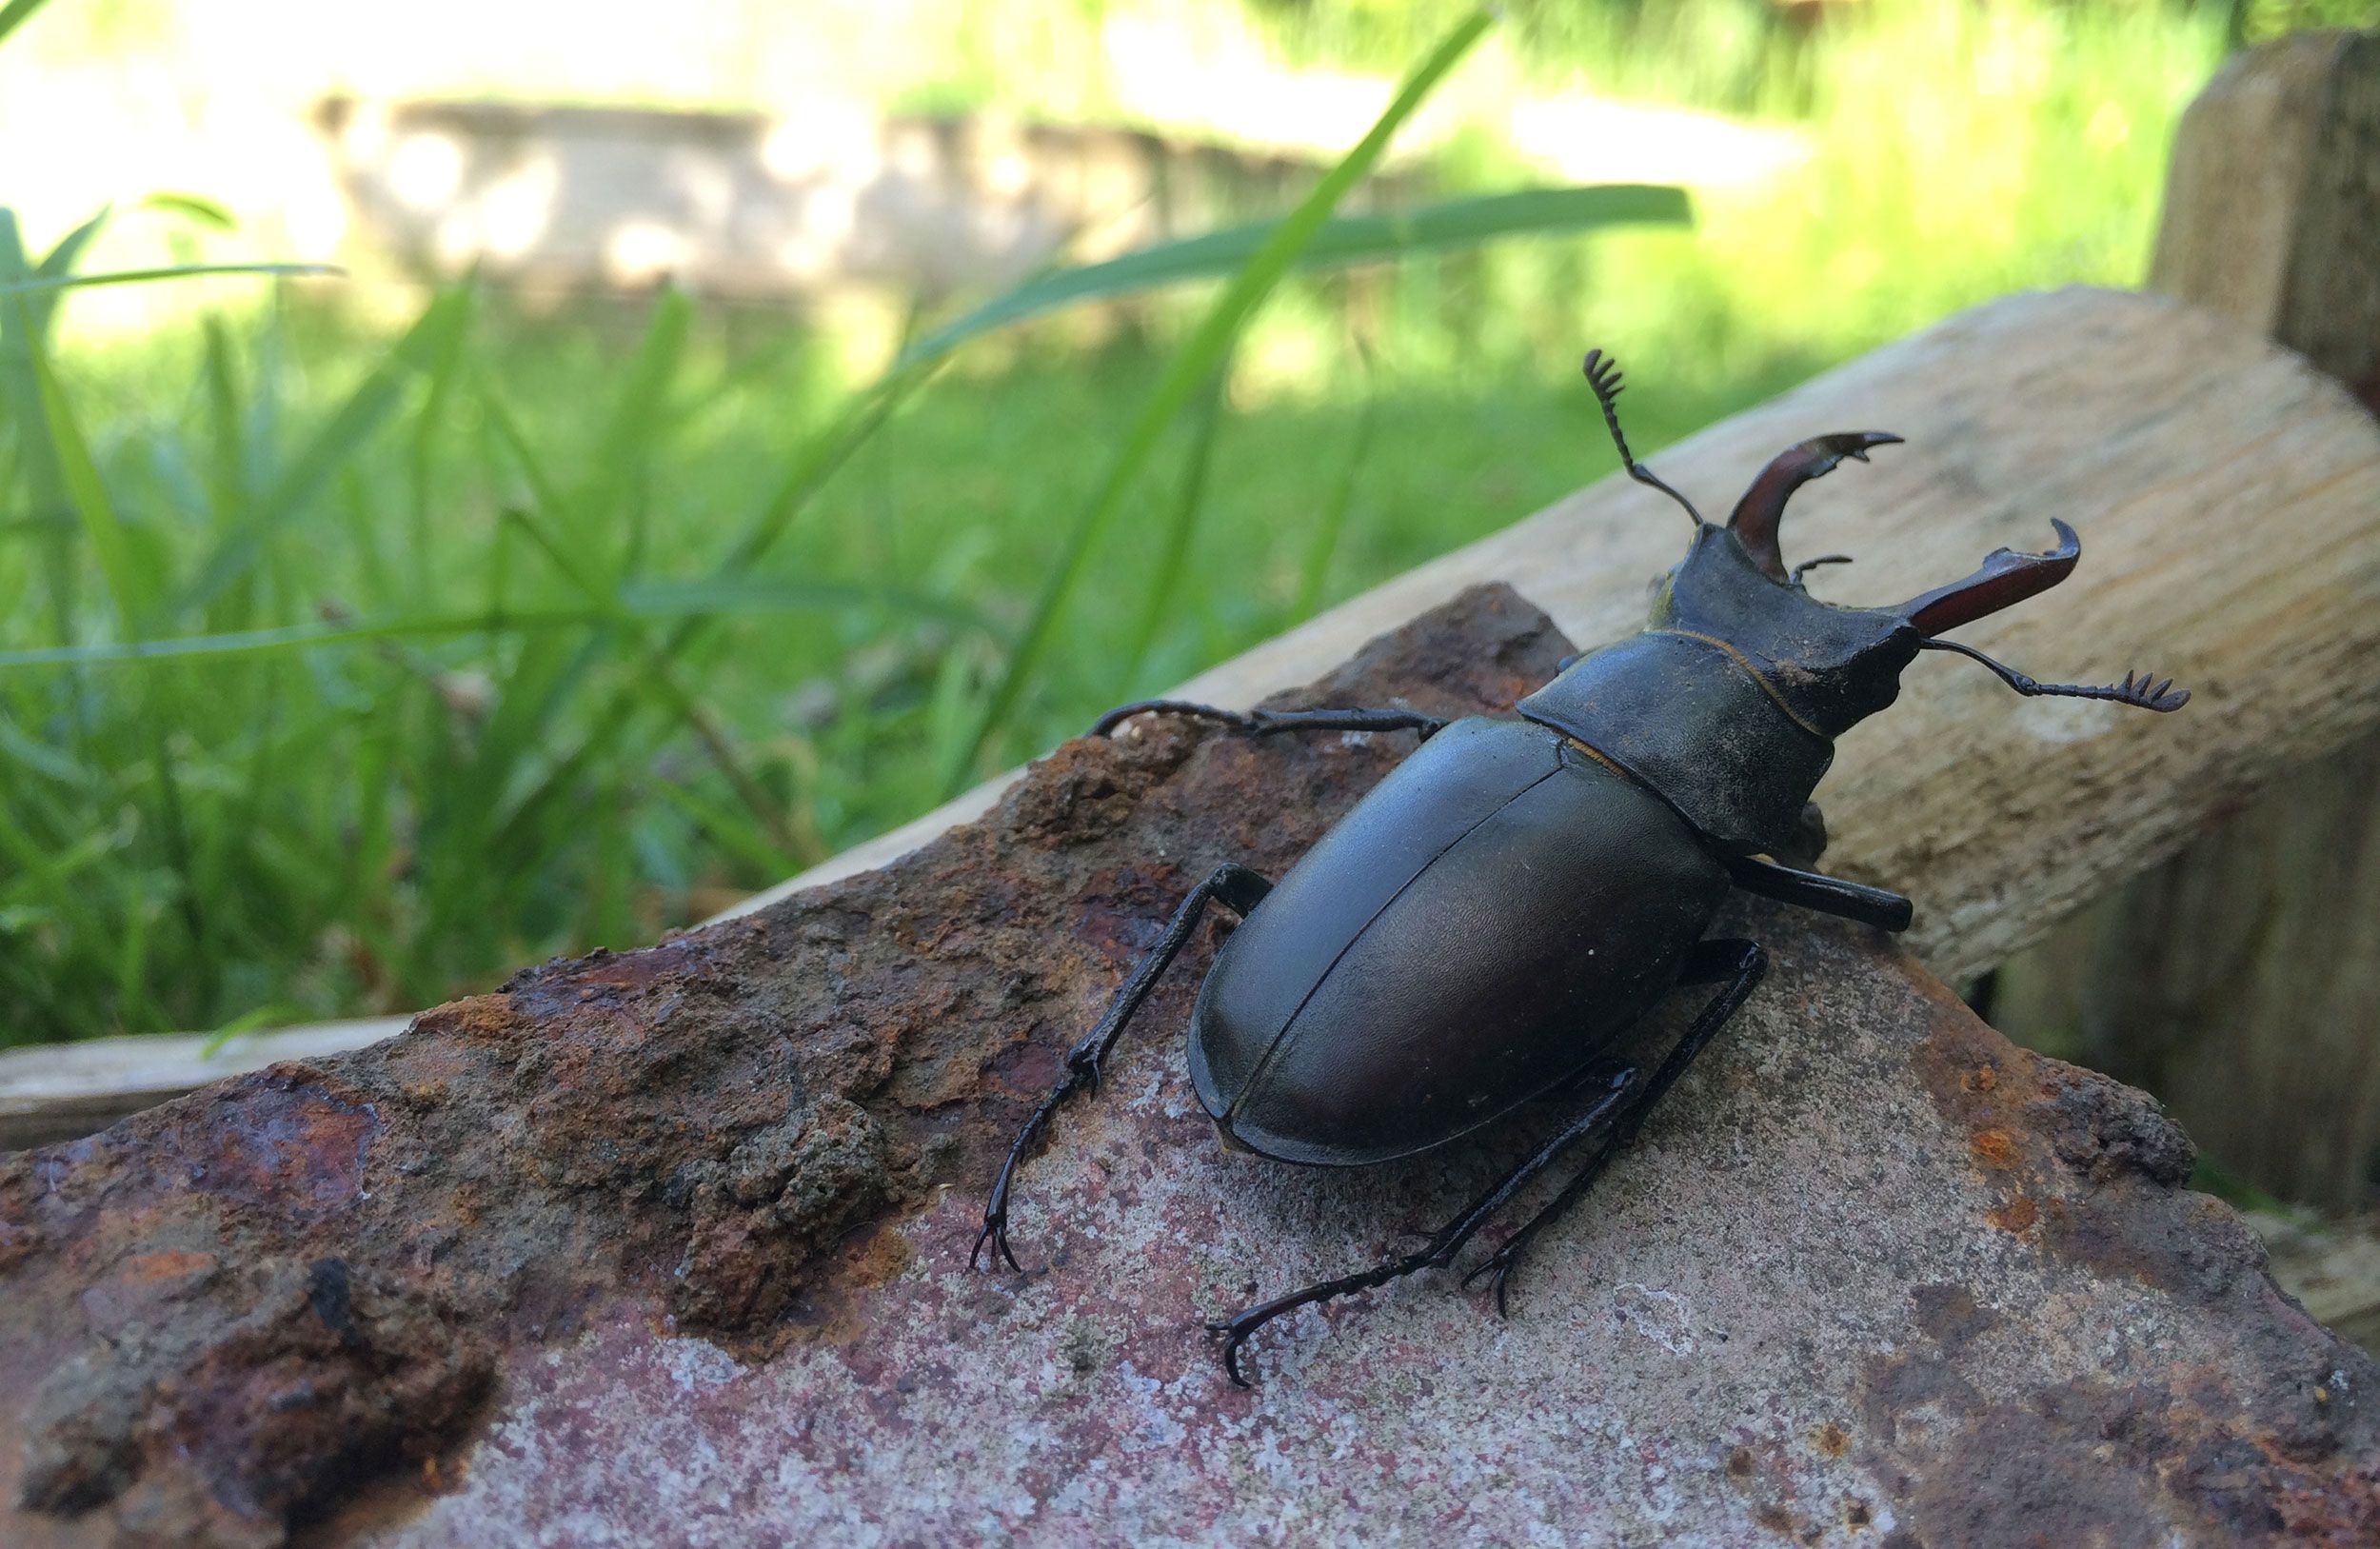 Lucy-Page-male-stag-beetle-